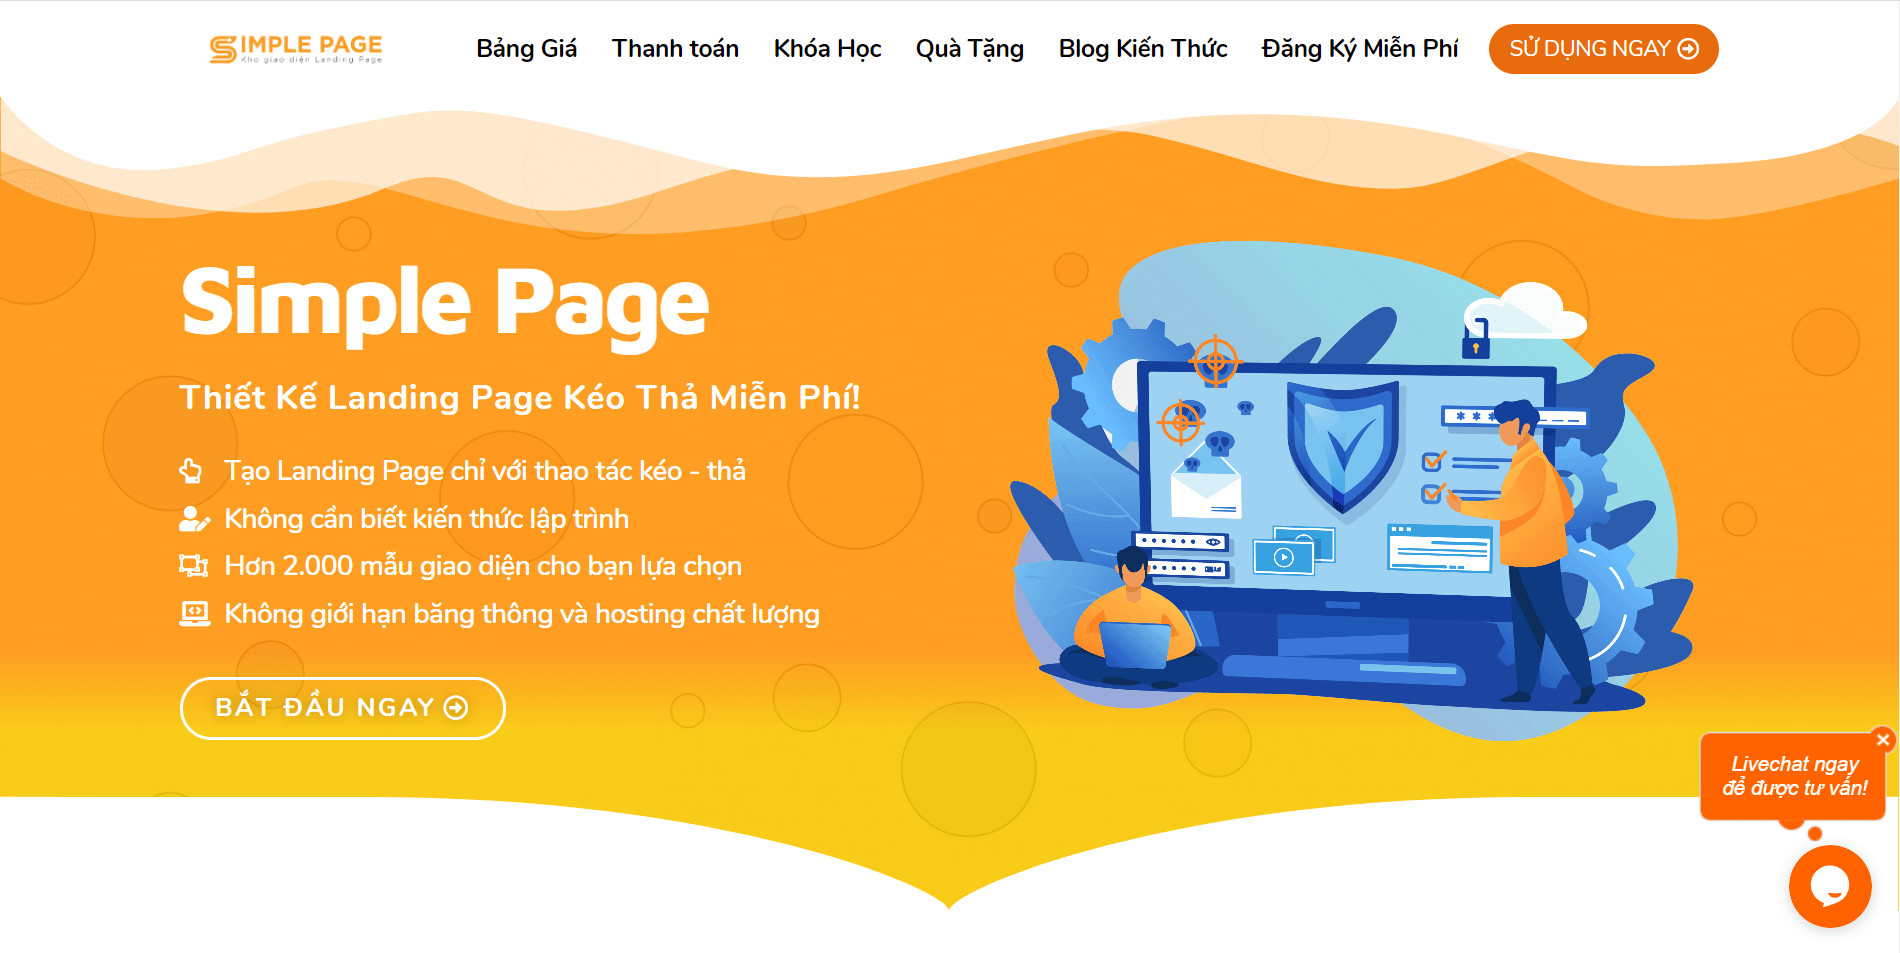 Dịch vụ landing page 4